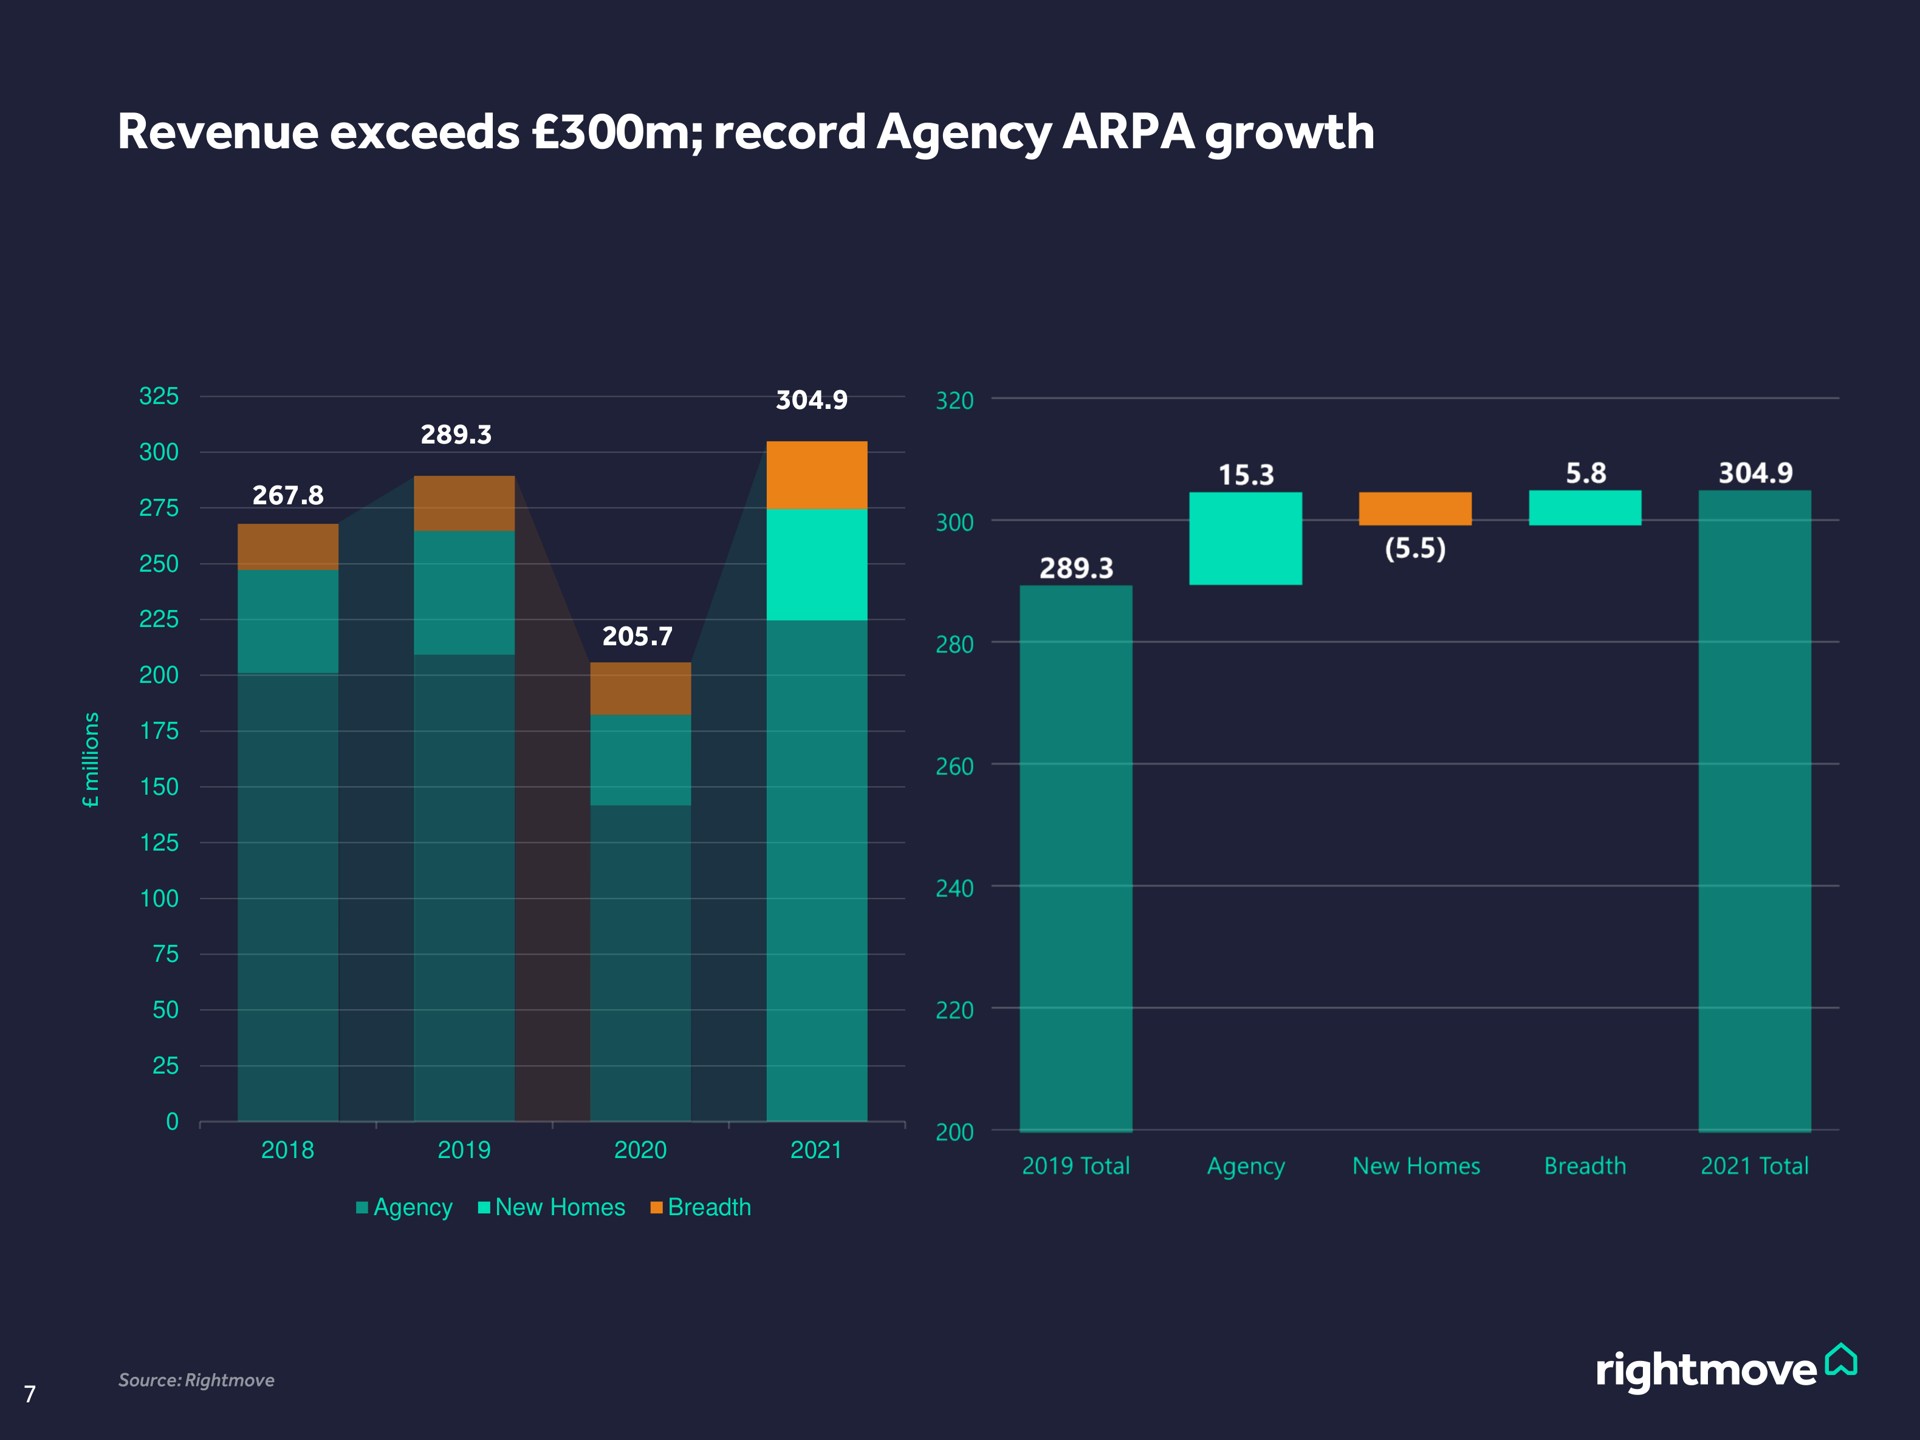 revenue exceeds record agency growth | Rightmove